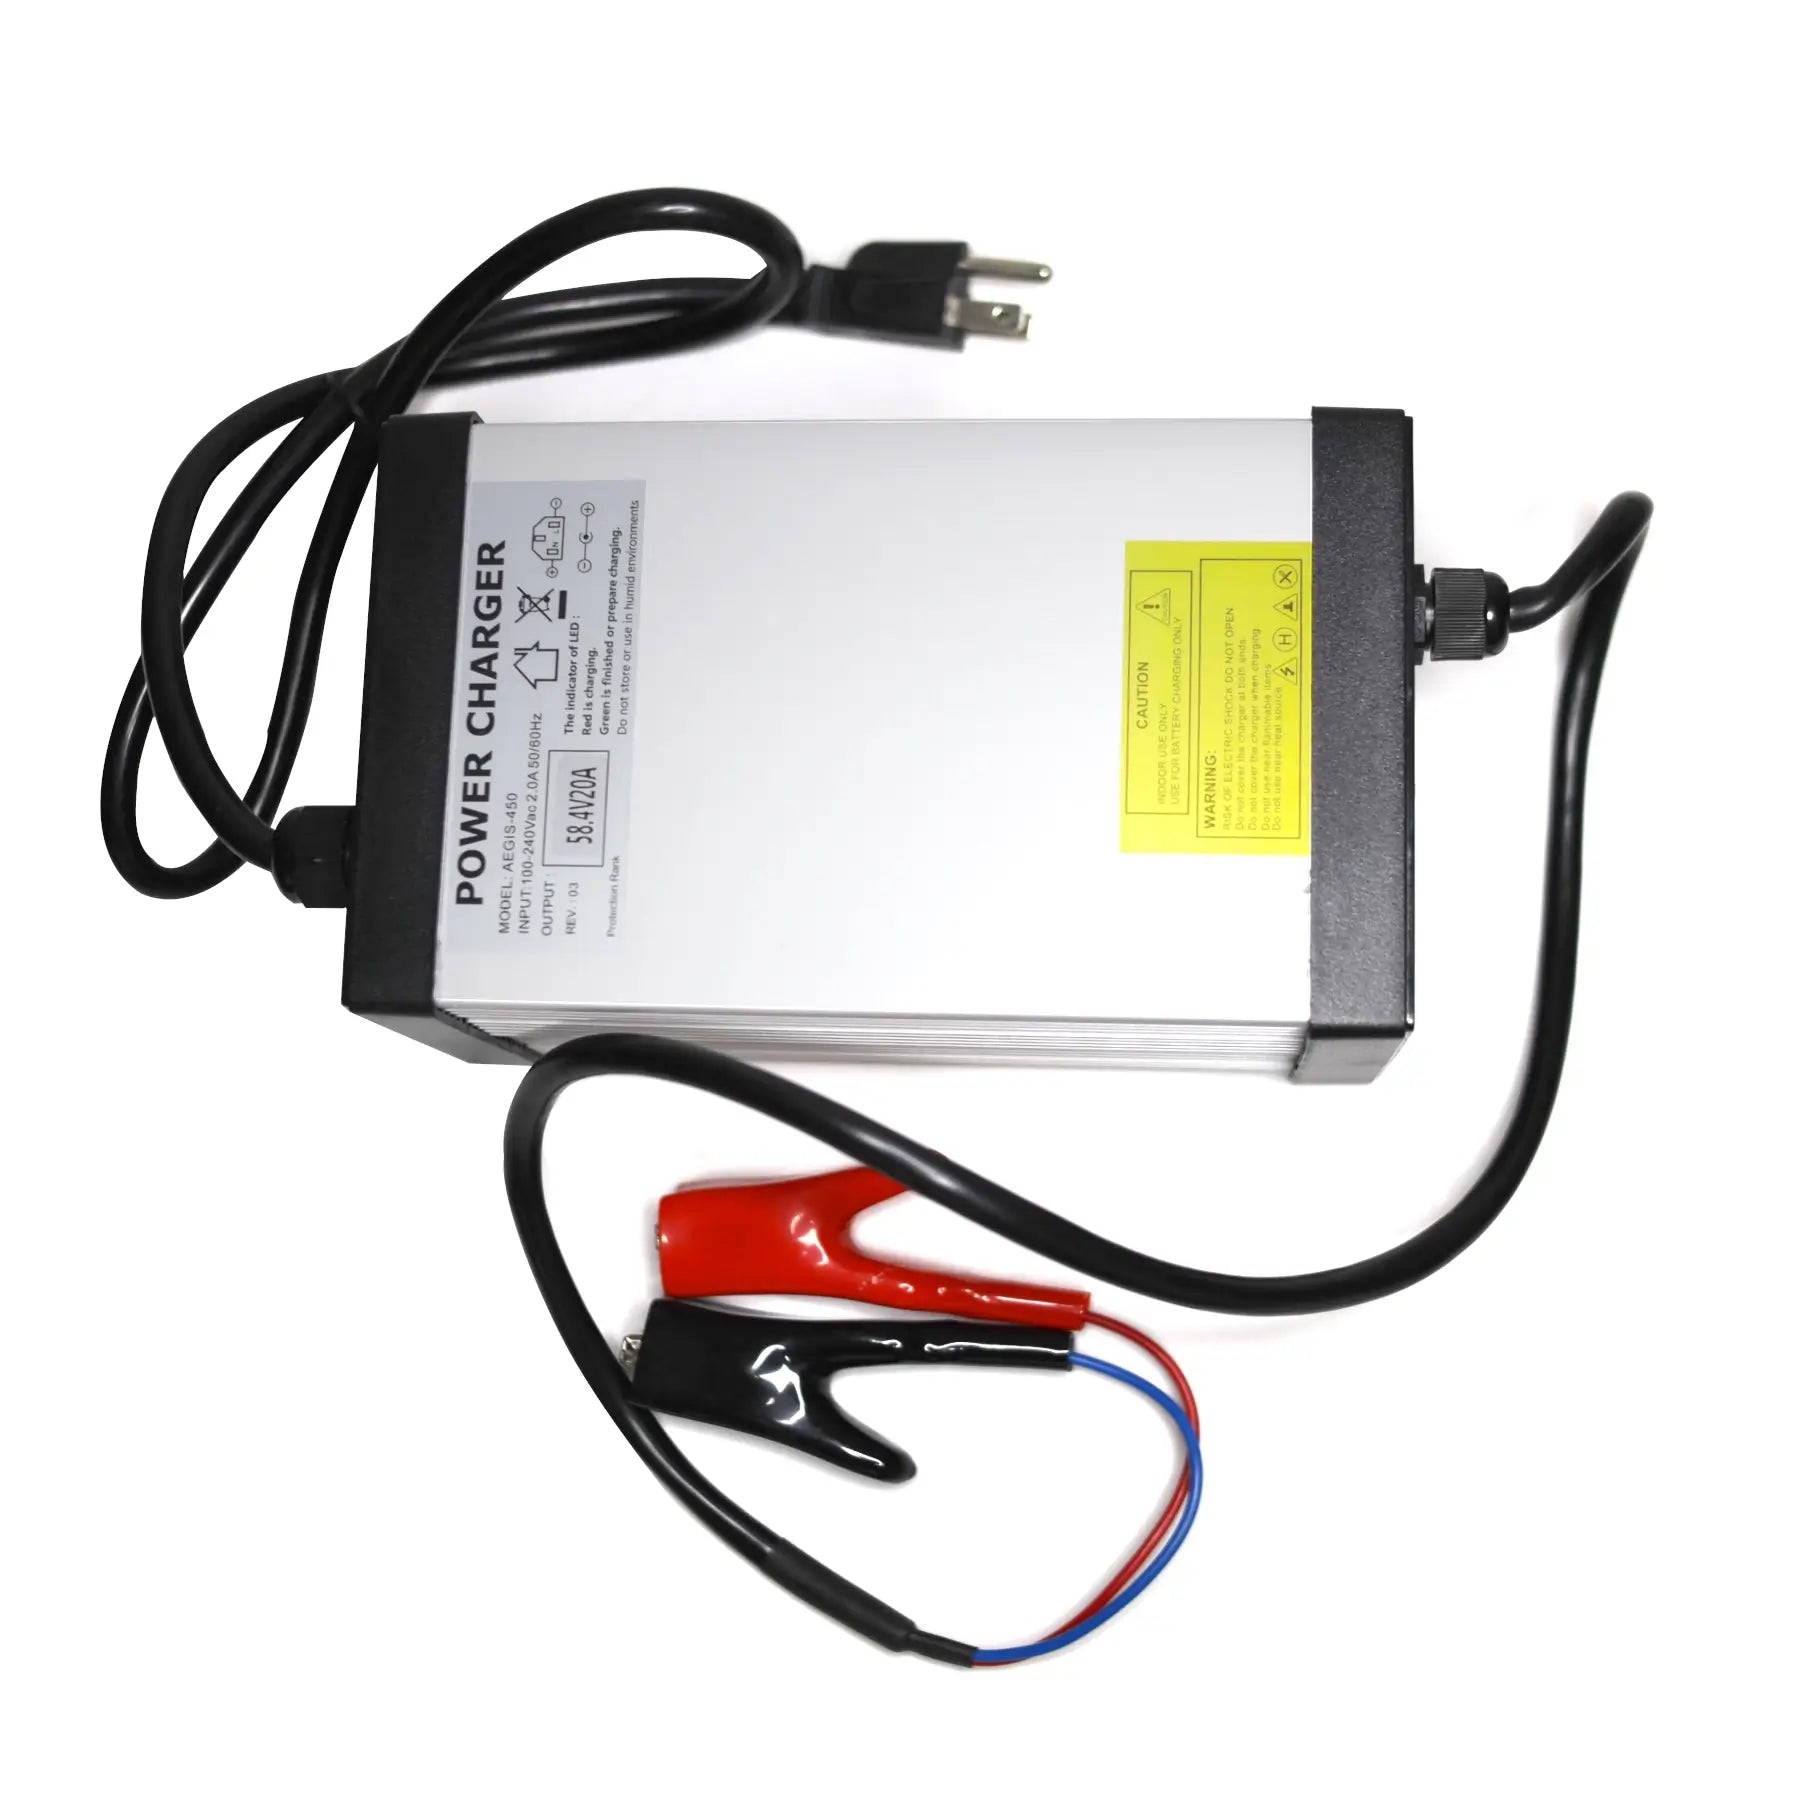 Charger 36V 240W-5A for Lithium Iron Phosphate battery - LiFePO4